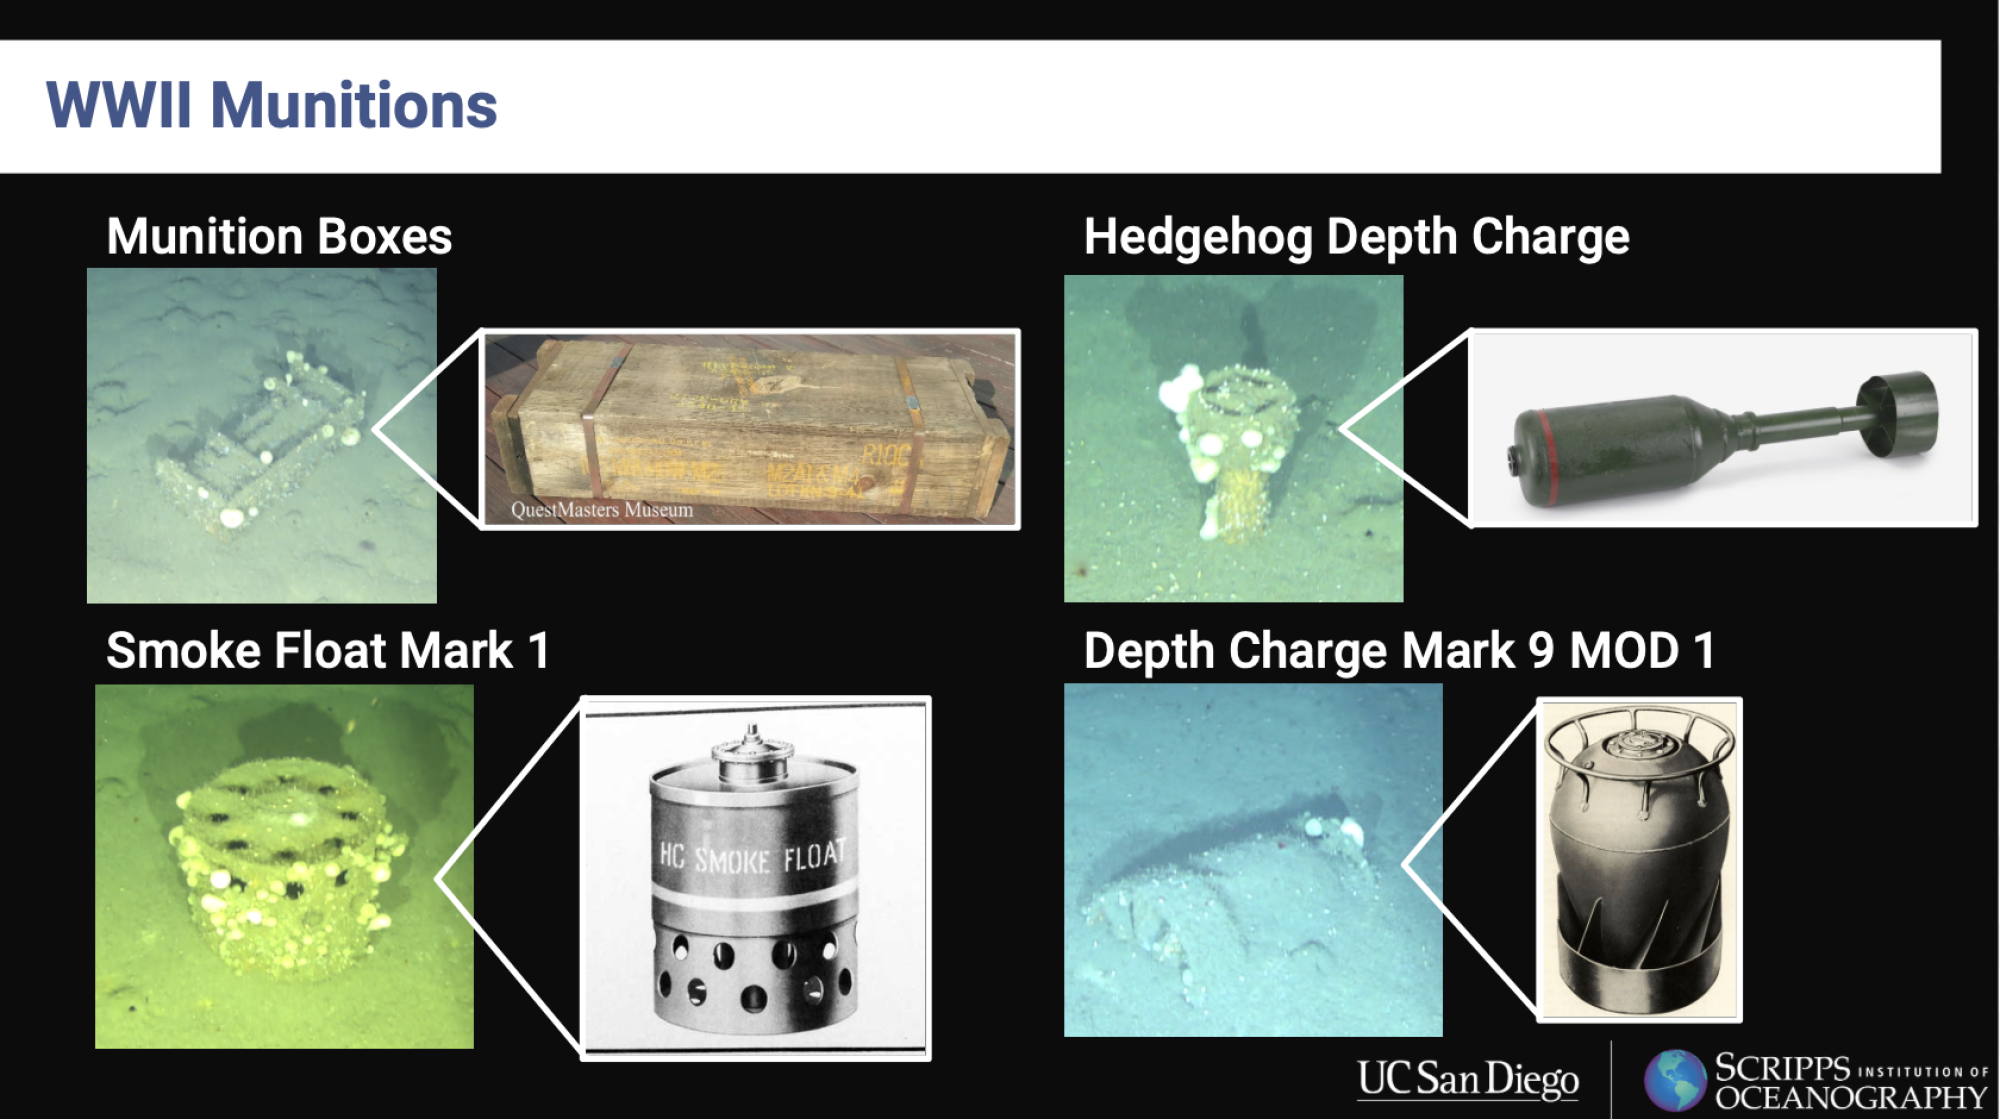 Images of munition boxes, smoke floats and two types of WWII-era depth charges that Scripps researchers found underwater.